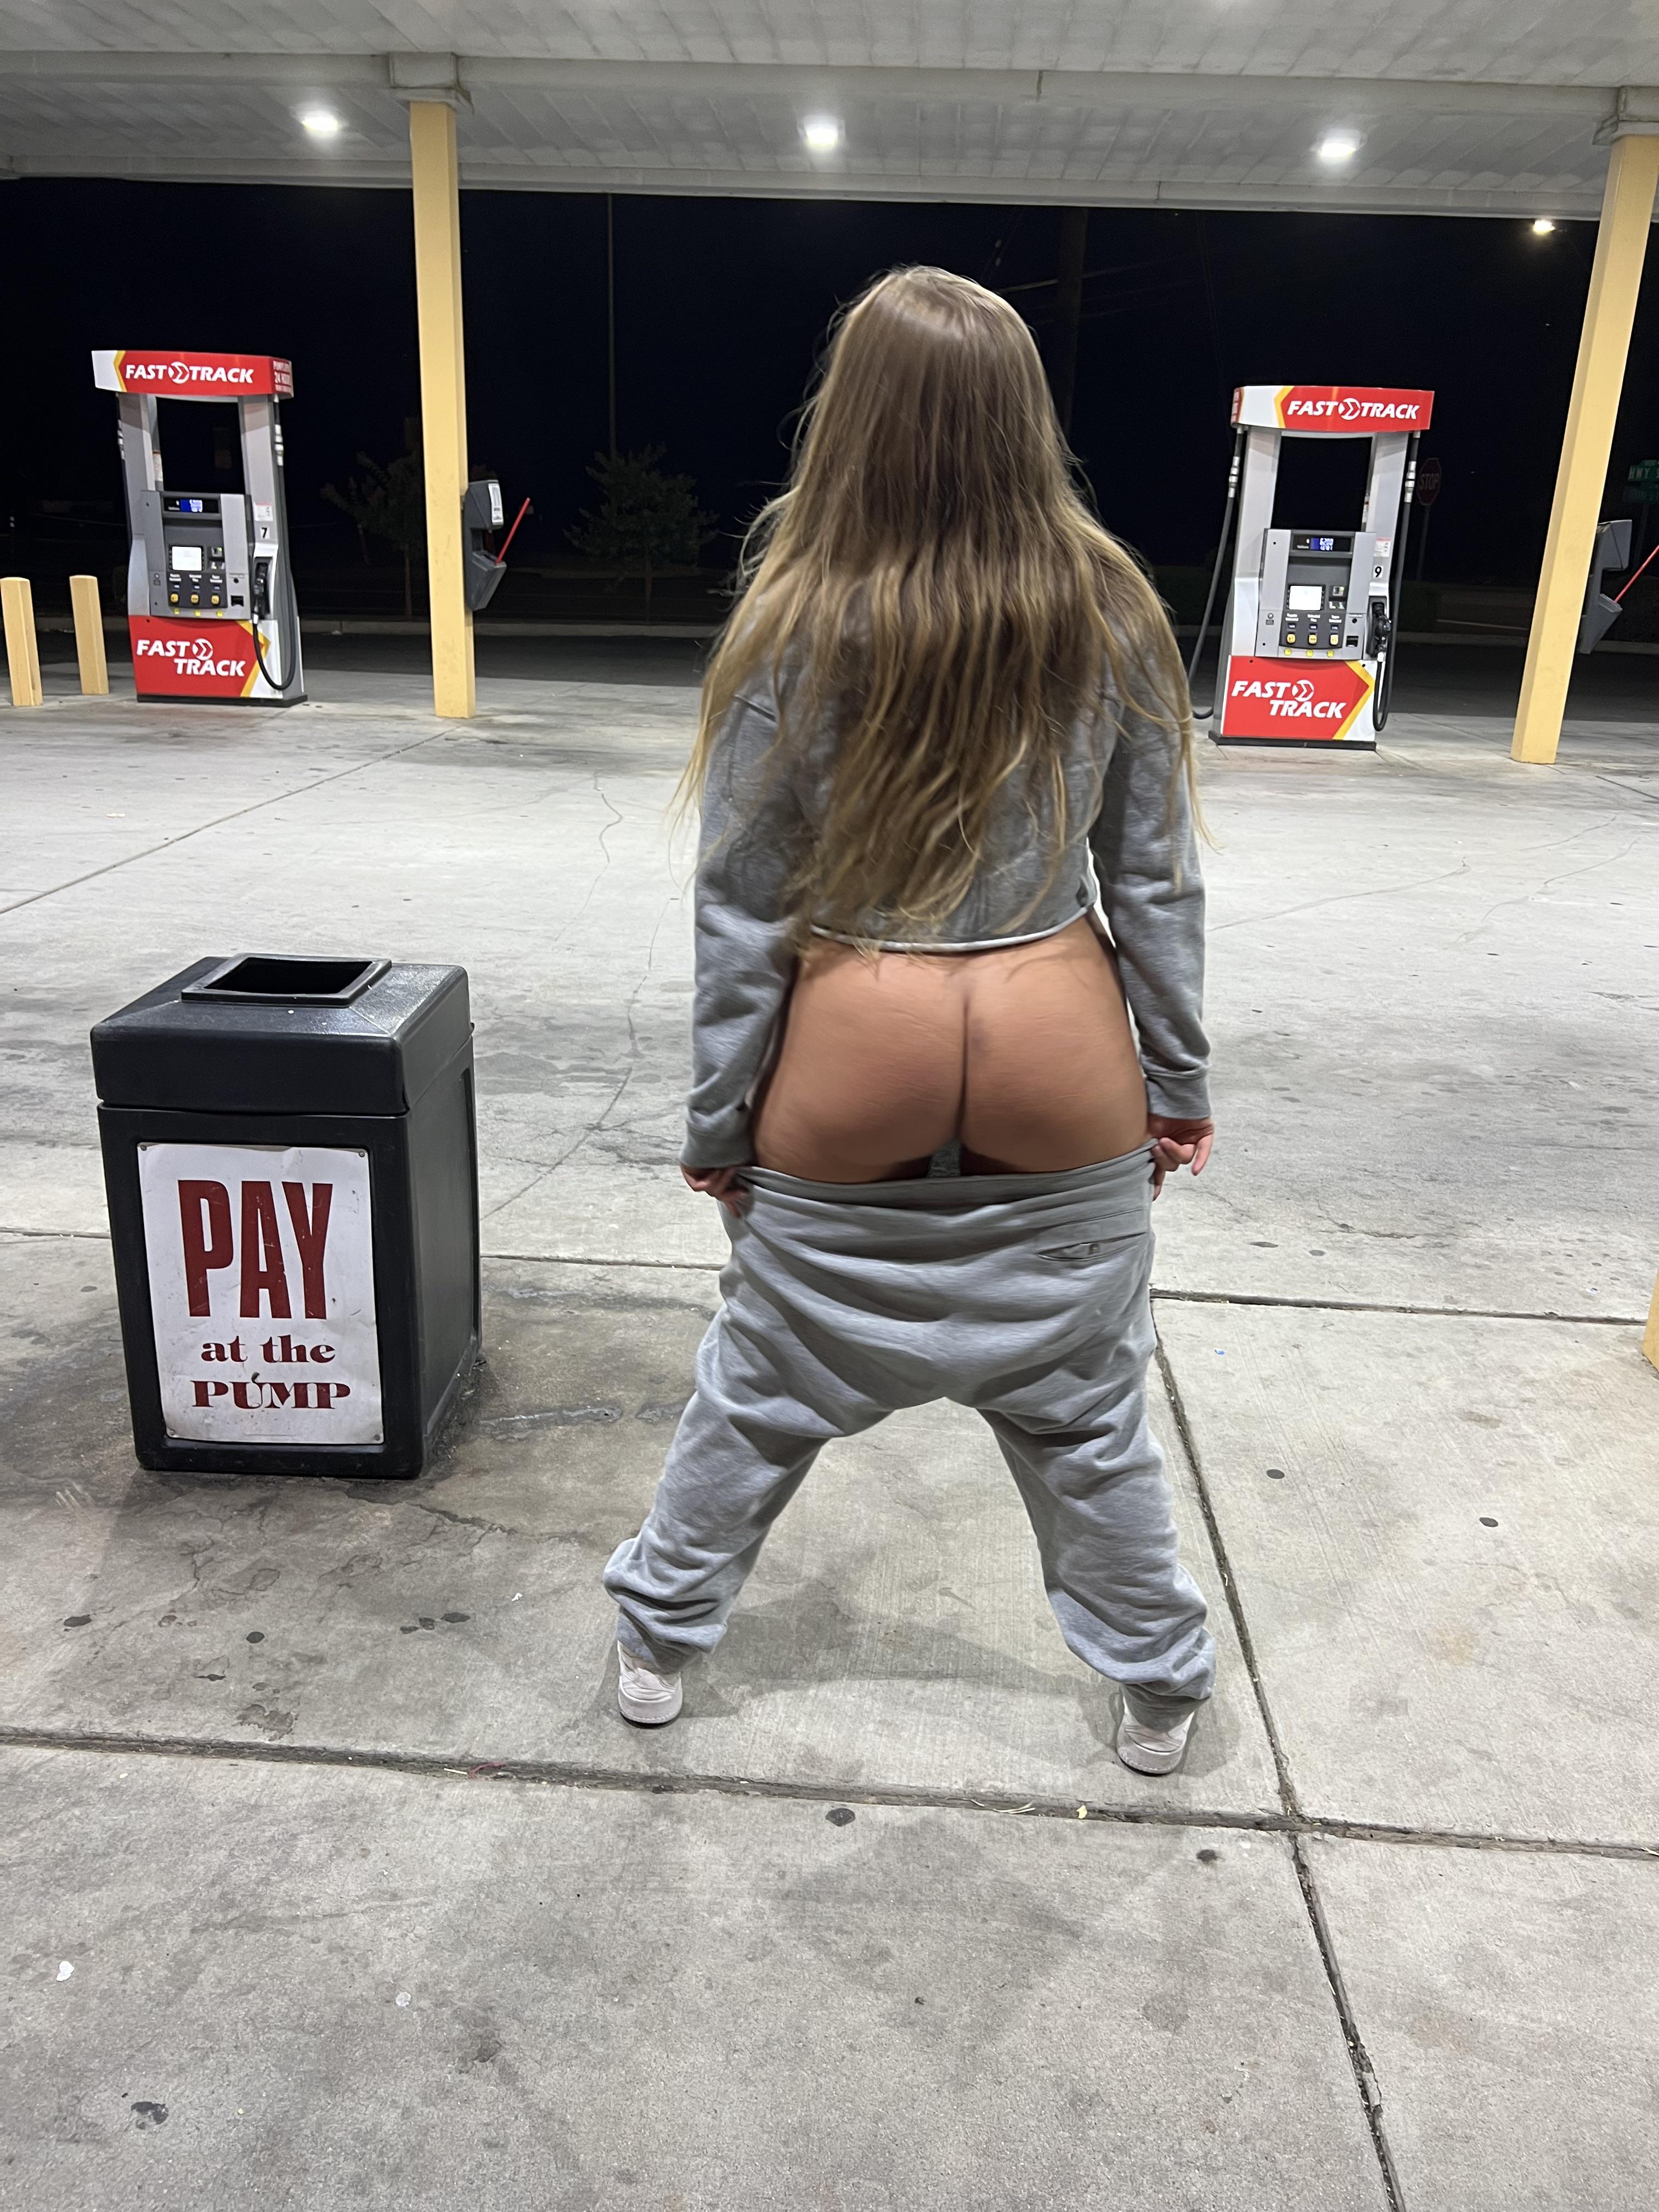 PAWG Casually pulling my pants down at the gas station……Pay